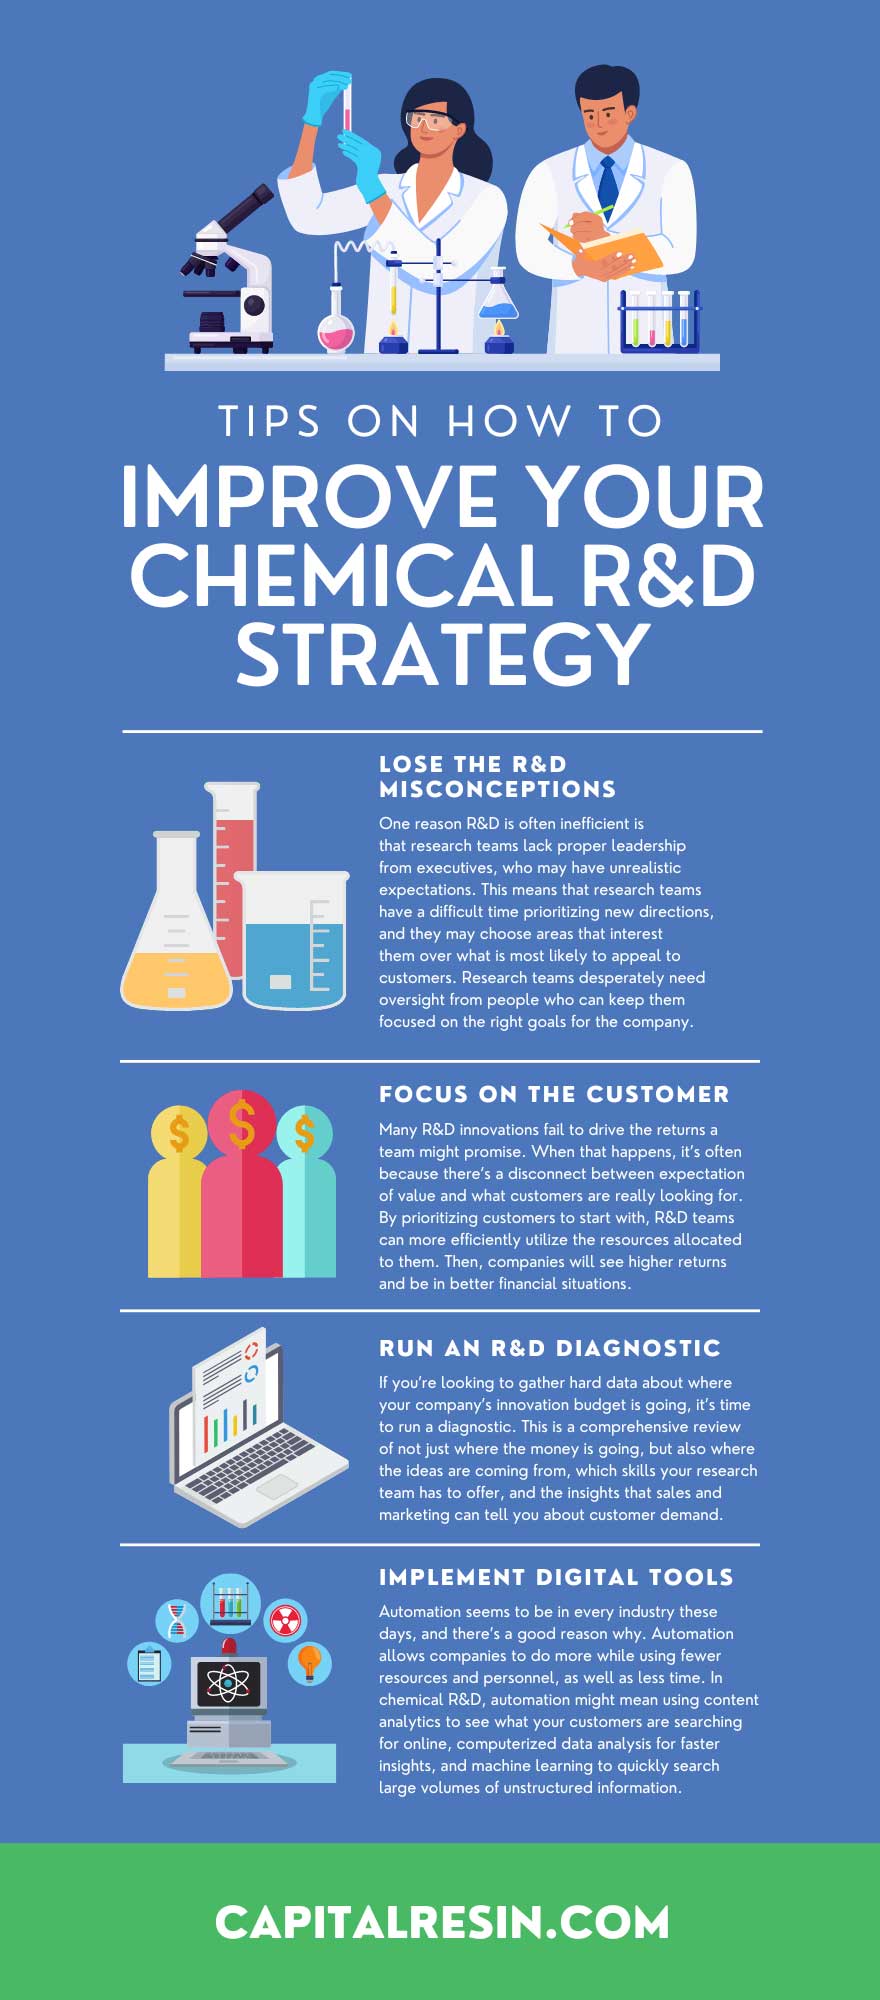 Tips on How To Improve Your Chemical R&D Strategy